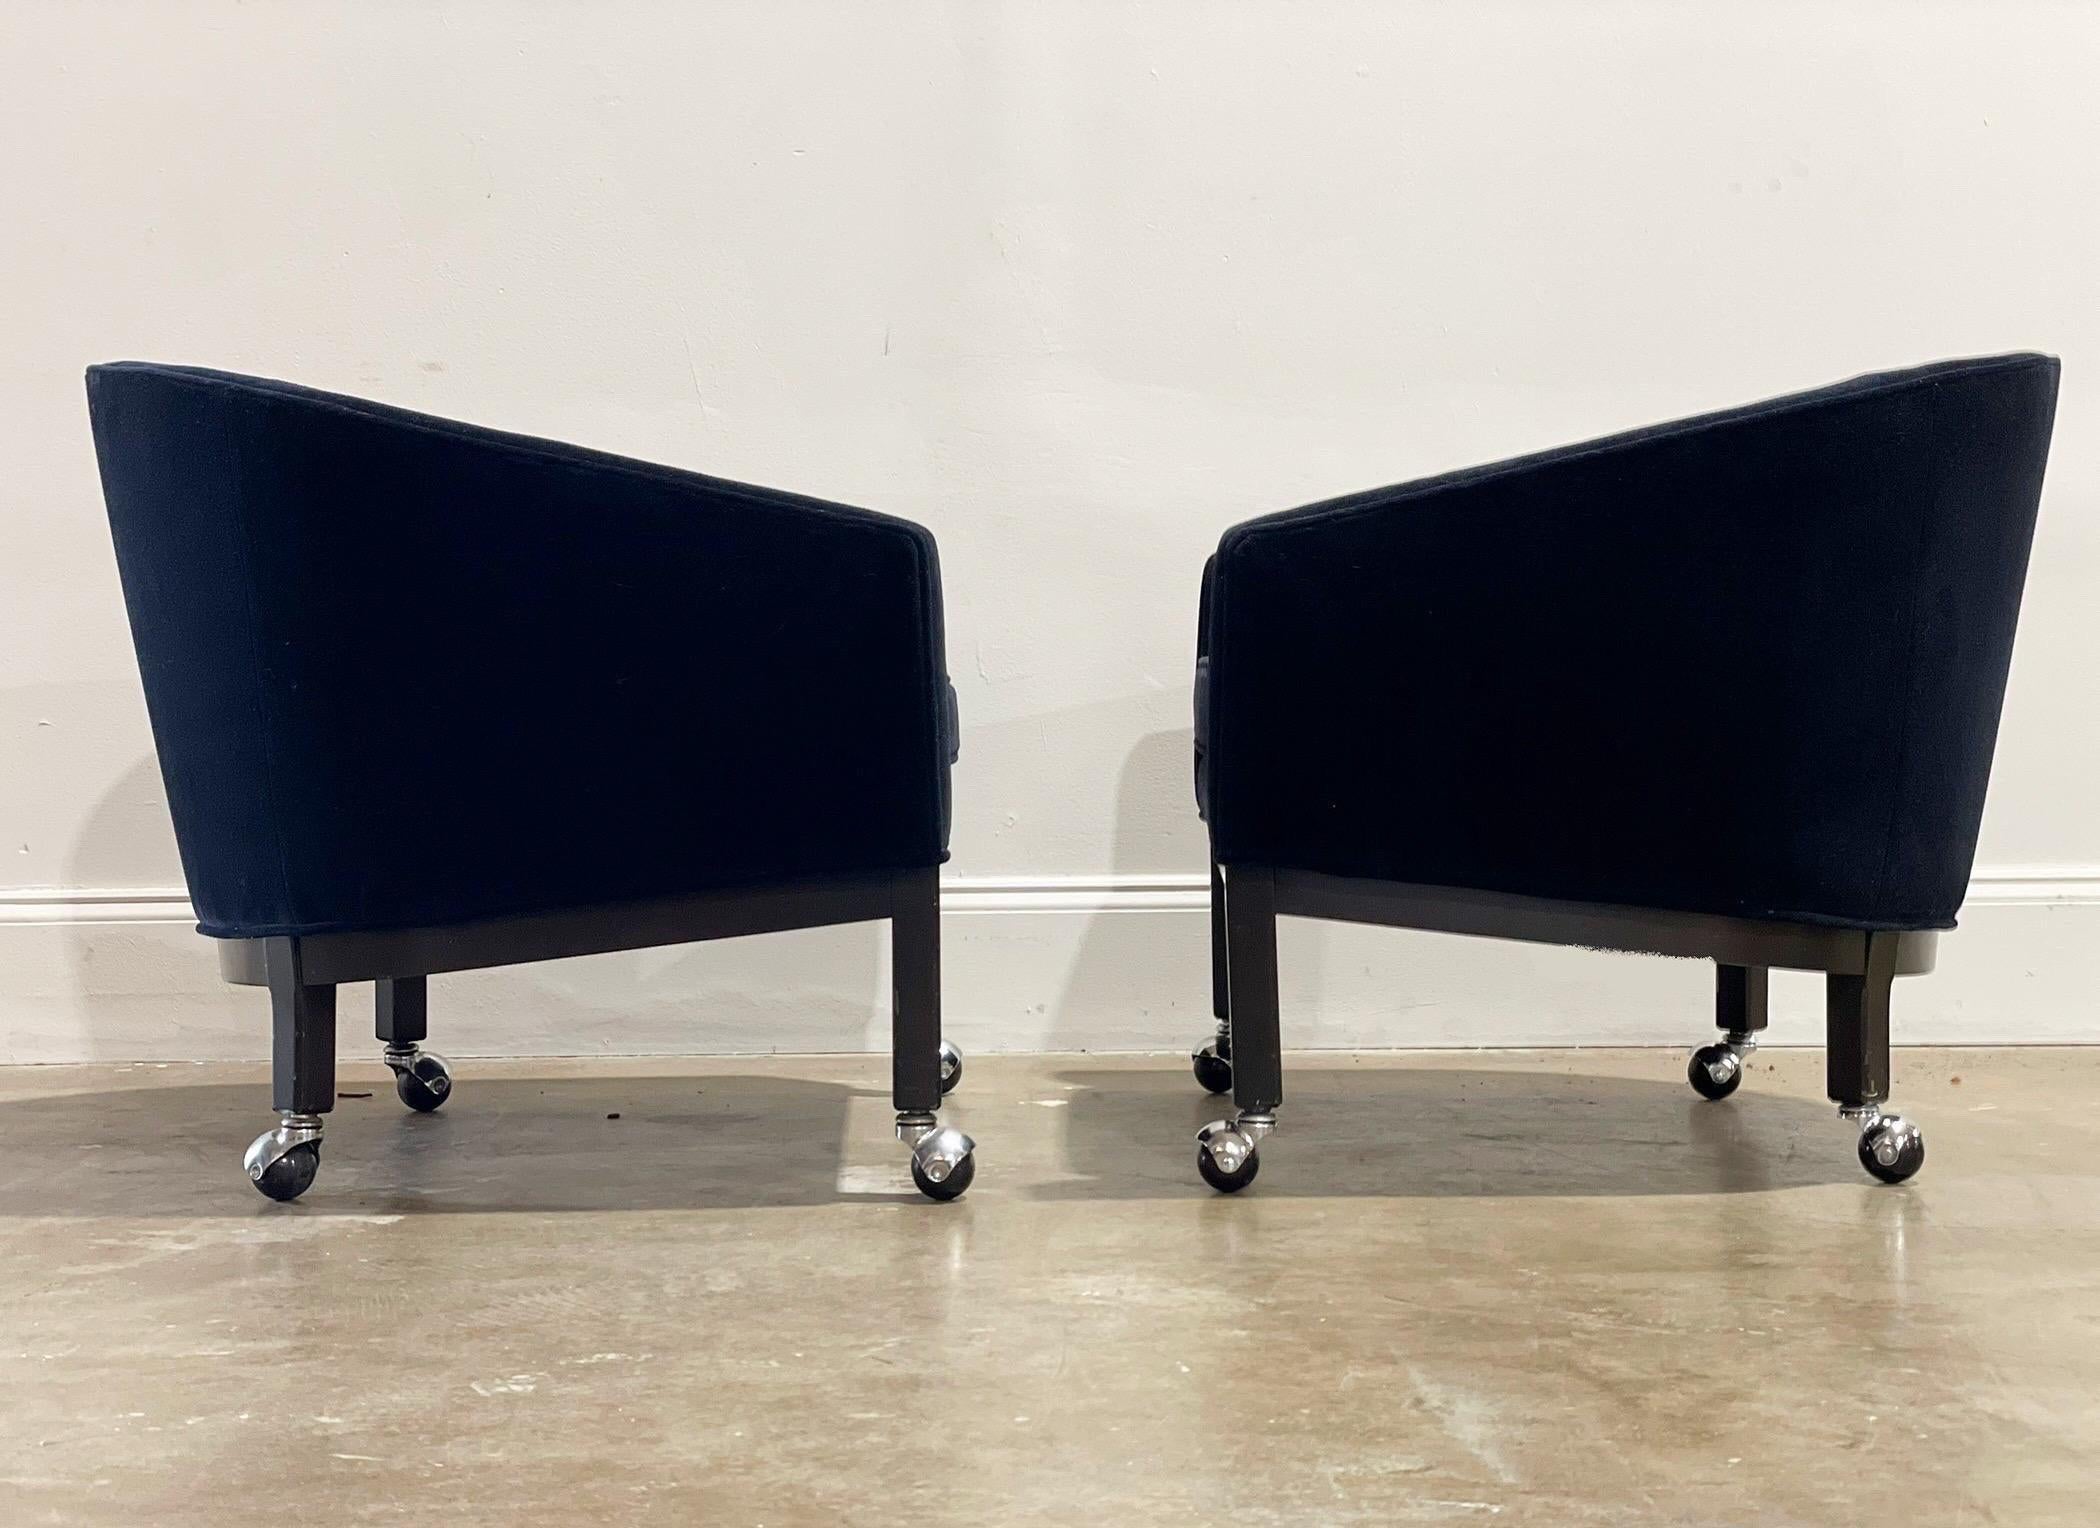 Exceptional barrel back lounge chairs by Kipp Stewart for Directional with all original tufted black velvet. Solid dark mahogany bases with chrome casters. An elegant and modern silhouette lends to a multitude of design esthetics. Attended to by our